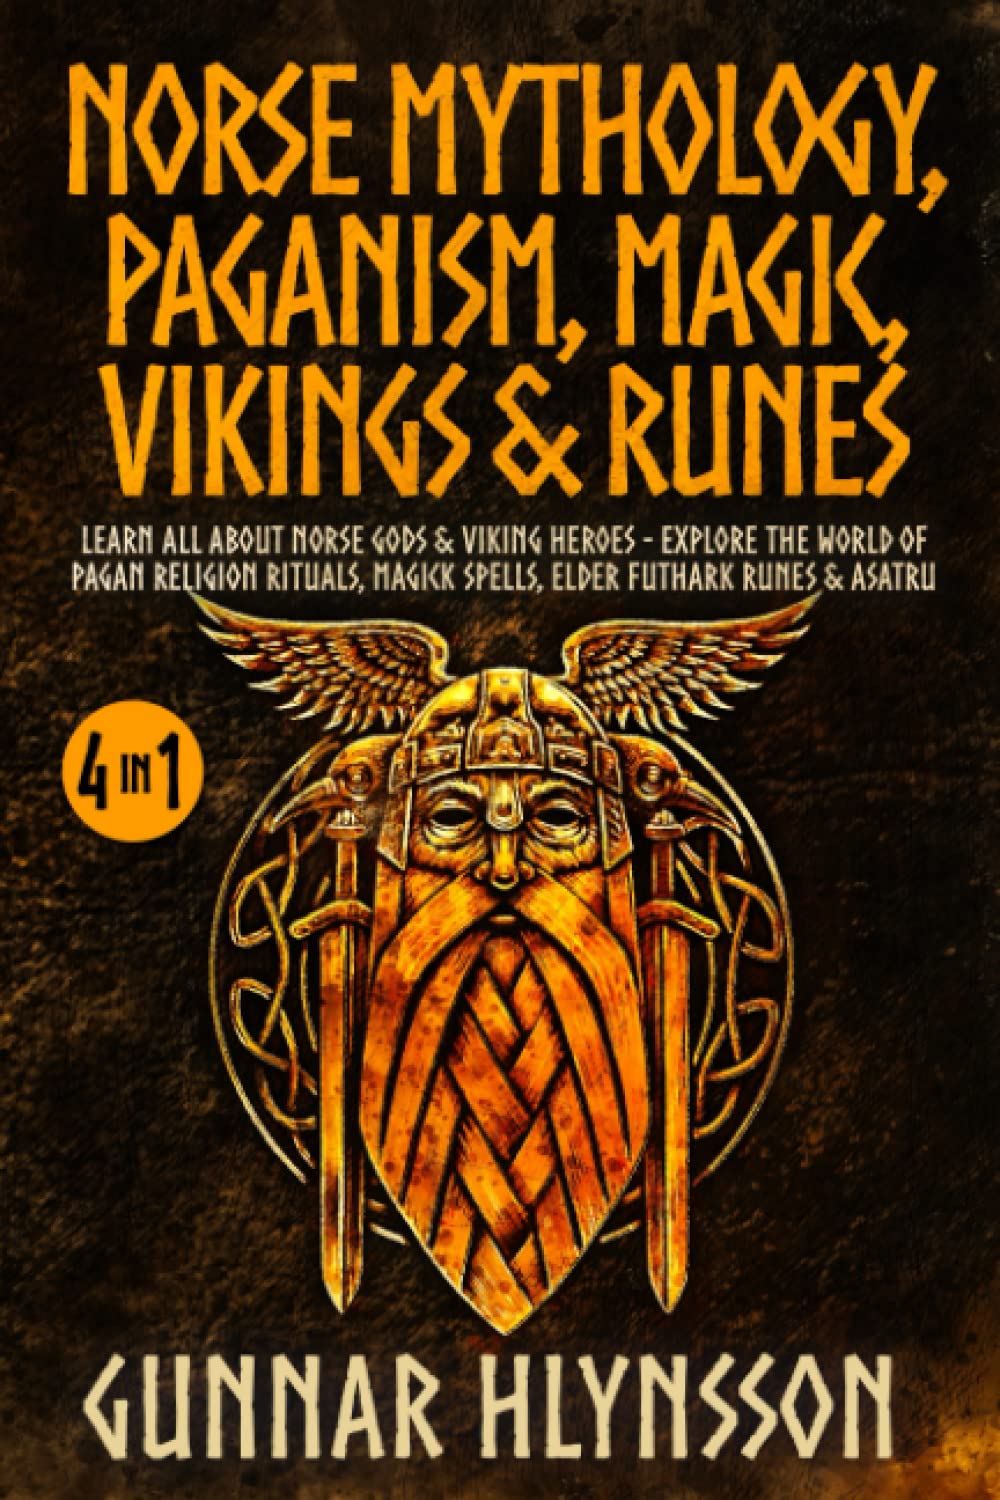 Norse Mythology, Paganism, Magic, Vikings & Runes 4 in 1: Learn All About Norse Gods & Viking Heroes 